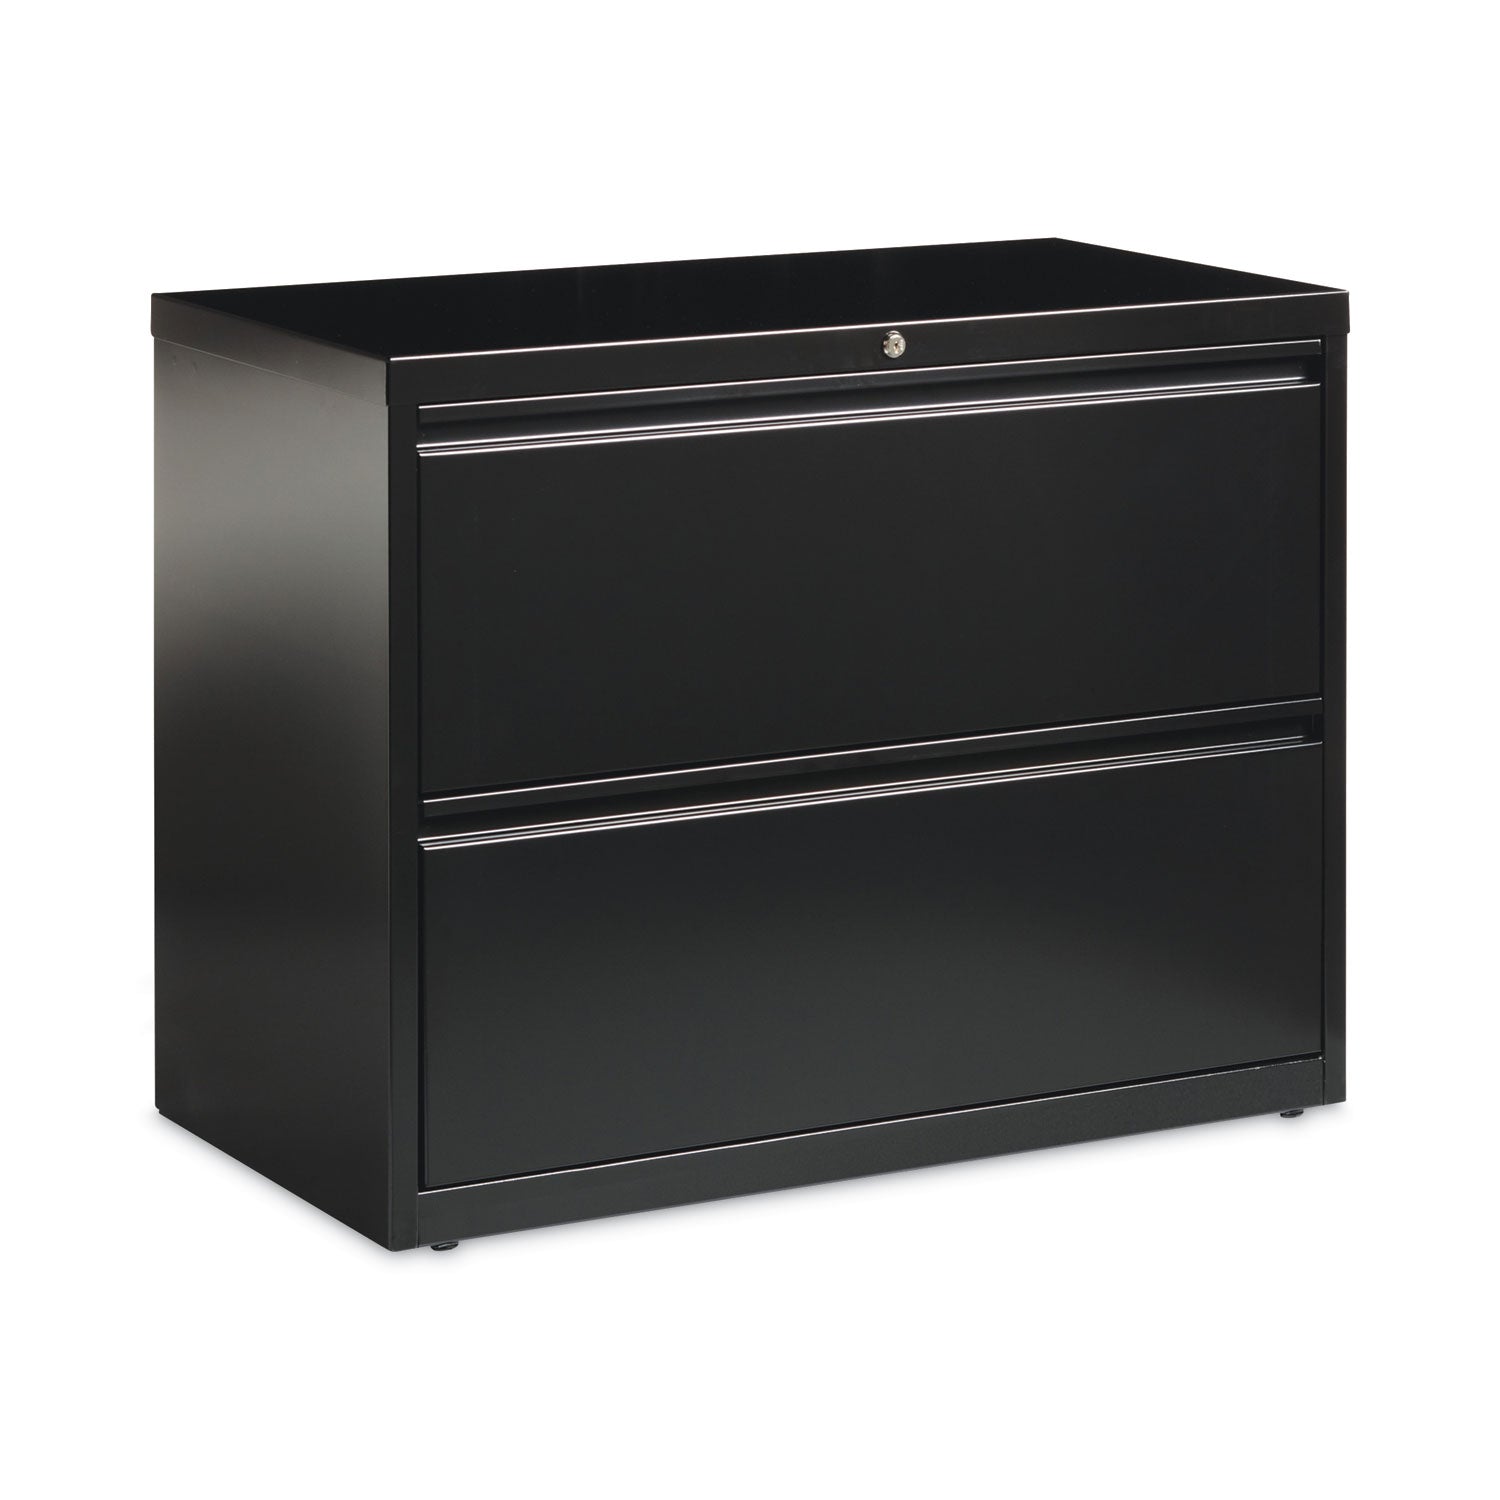 lateral-file-cabinet-2-letter-legal-a4-size-file-drawers-black-36-x-1862-x-28_hid14983 - 1